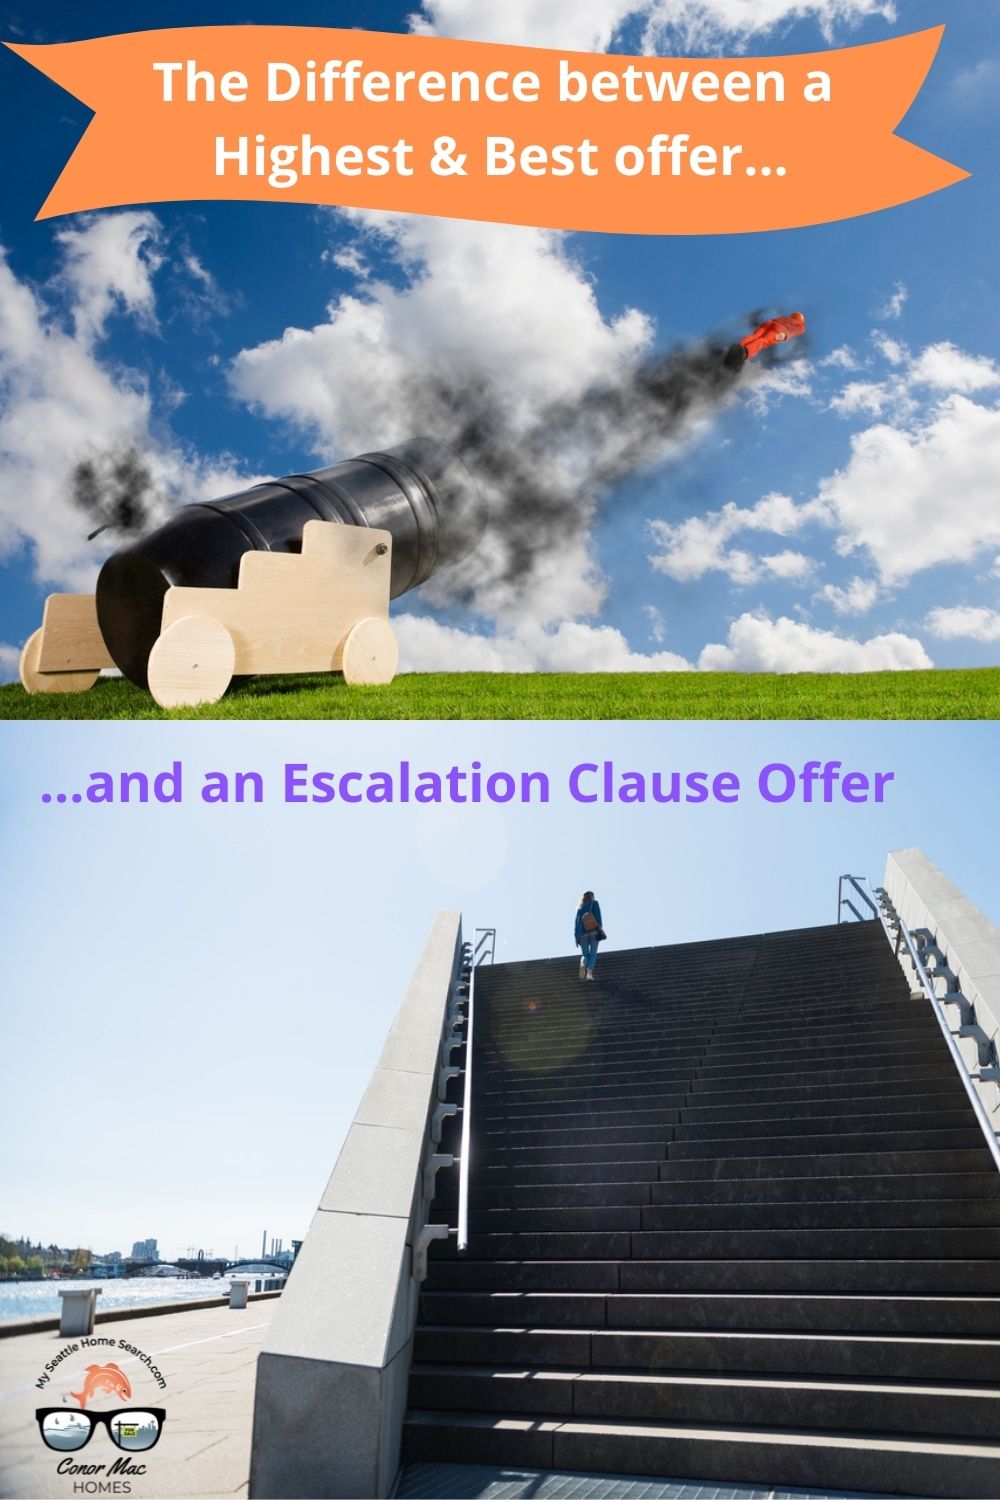 The difference between highest and best offer and escalation clause